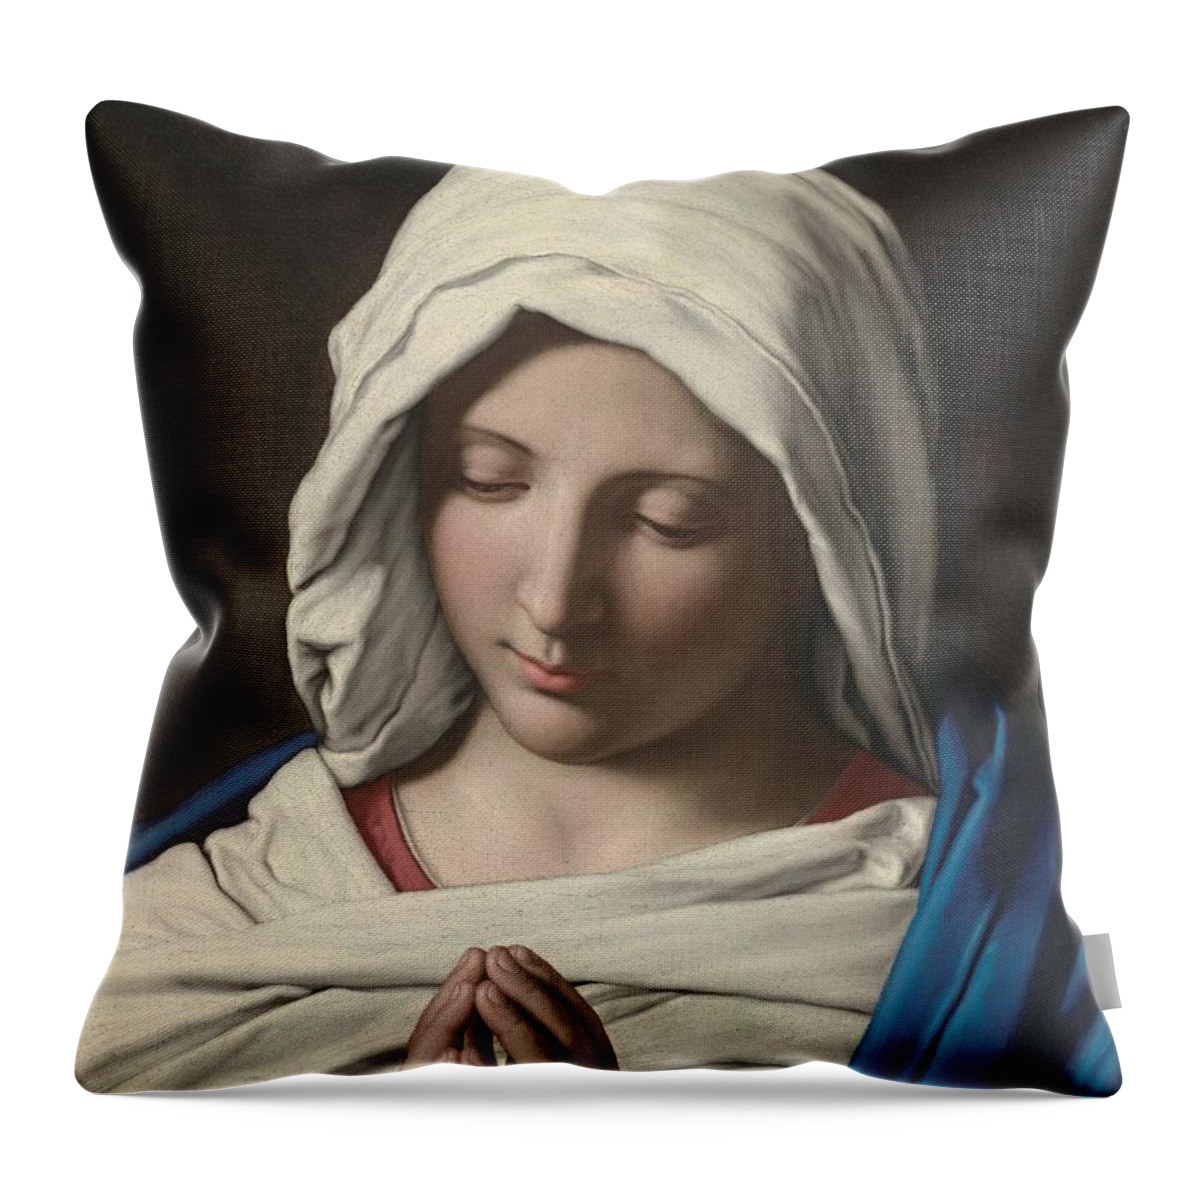  Throw Pillow featuring the painting Madonna in prayer by Sassoferrato